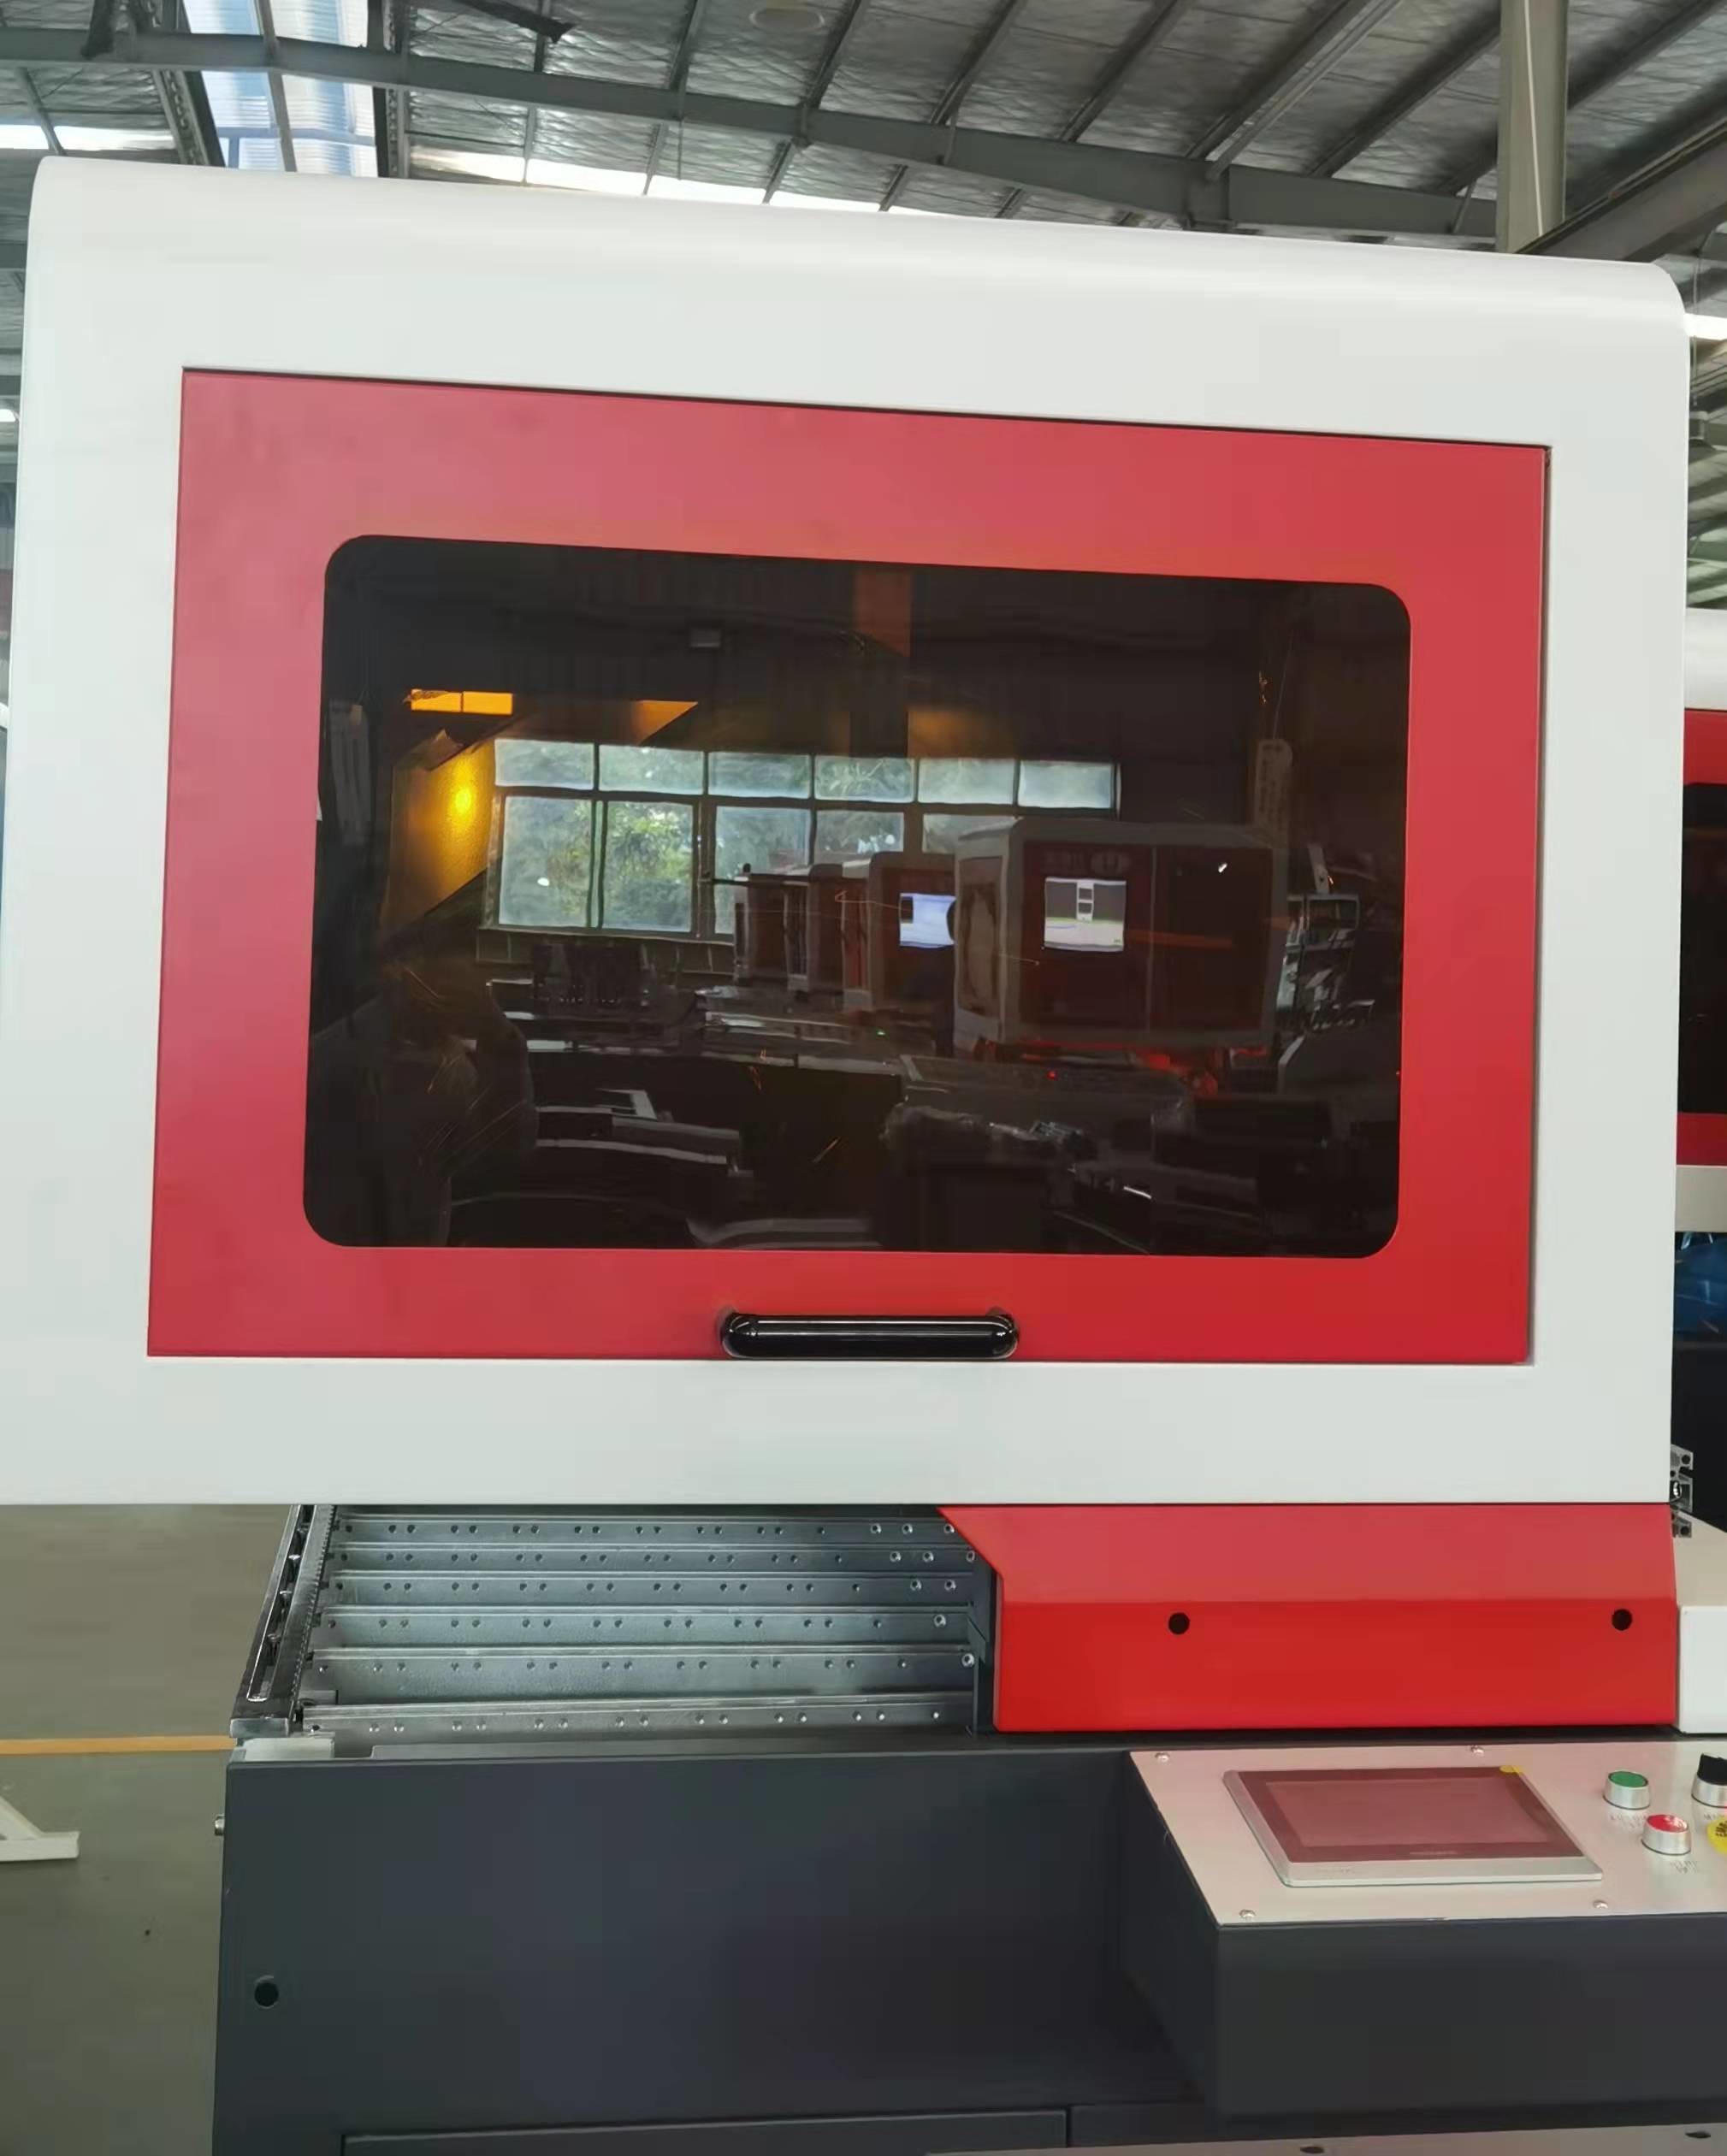 LY-485C Visual positioning machine for case making and luxury box making